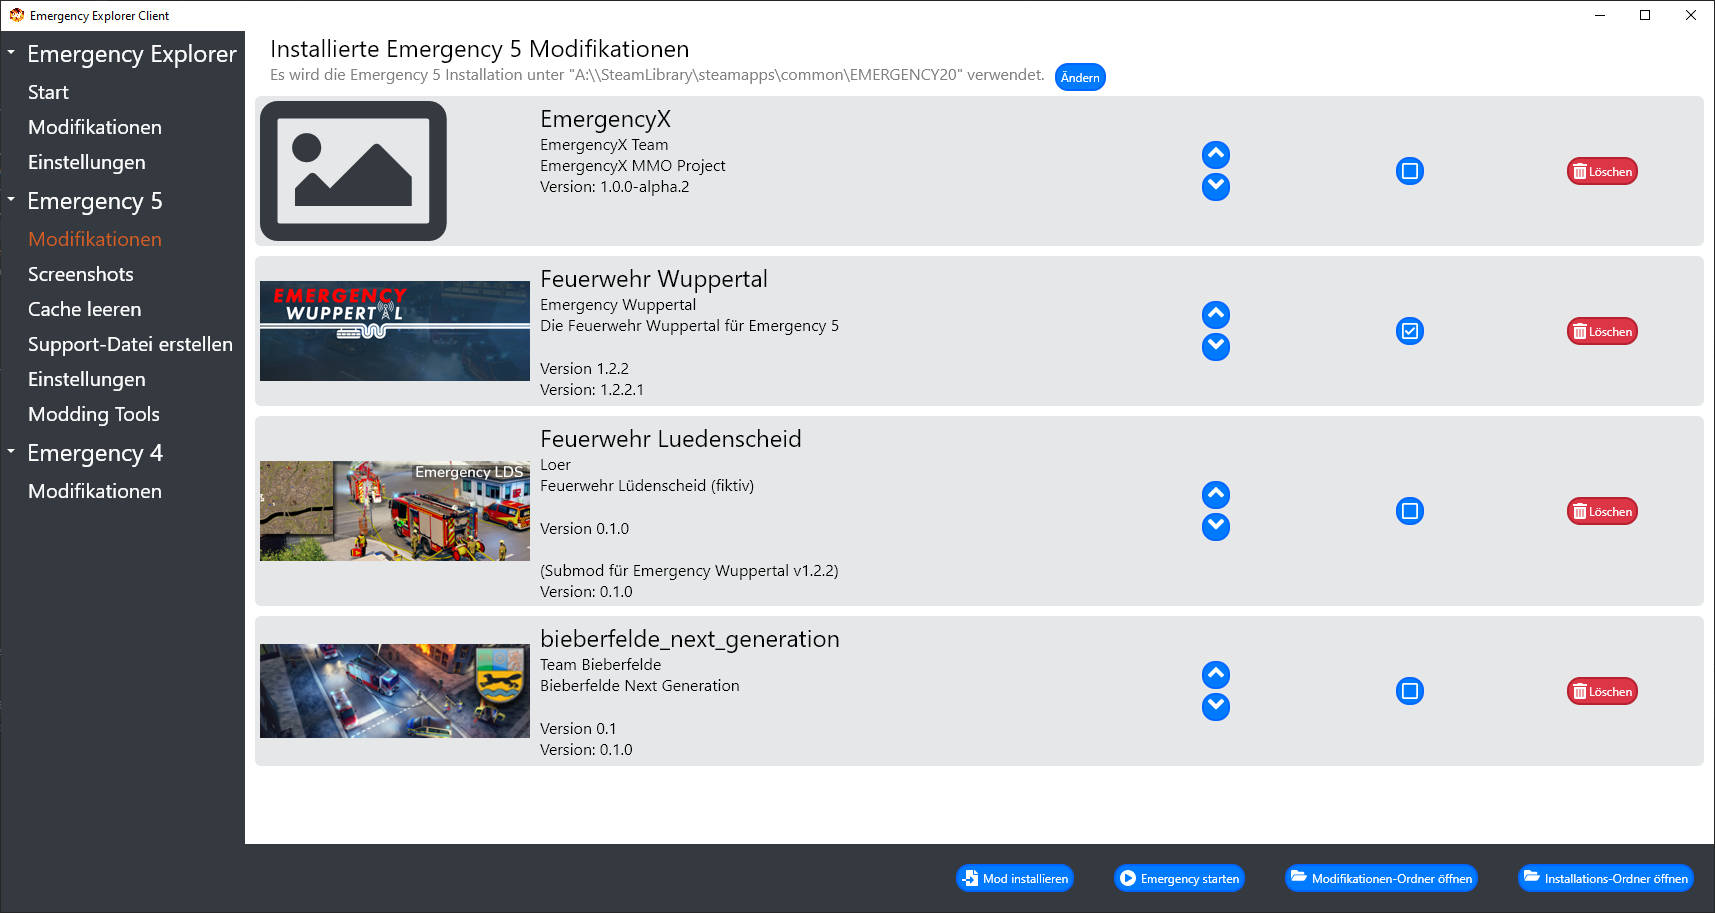 Picture of the Emergency 5 Modification Overview in Emergency Explorer